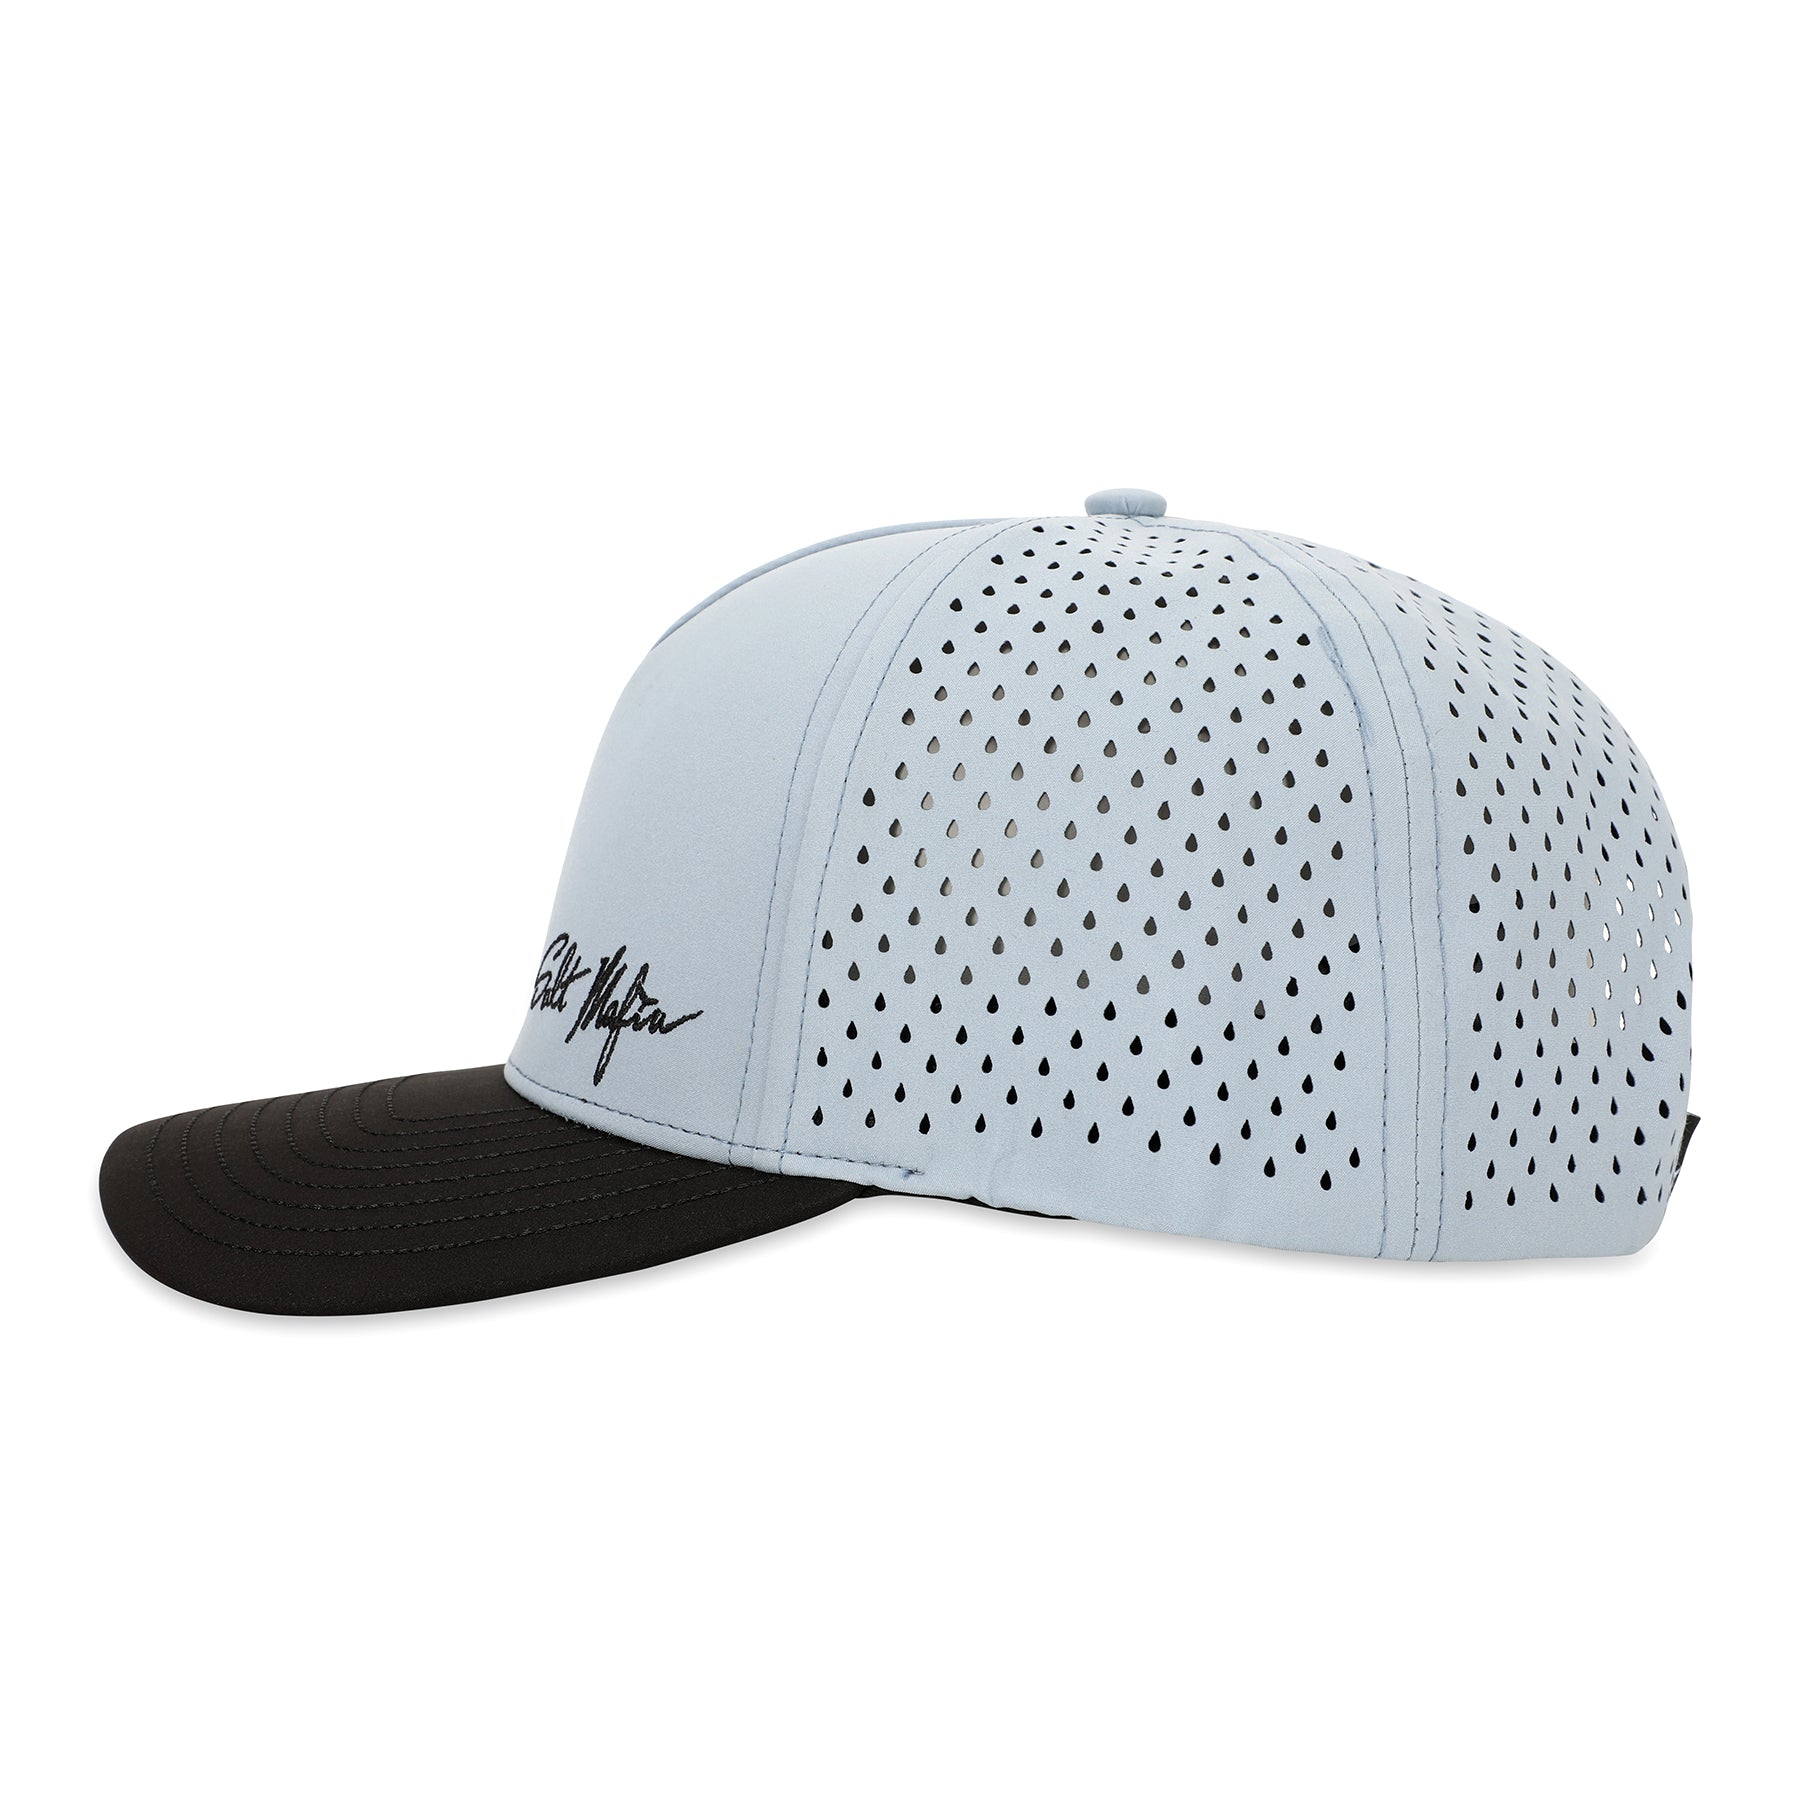 Salt Mafia Performance Hat - The S-Sky (Curved) - Seamless Collection